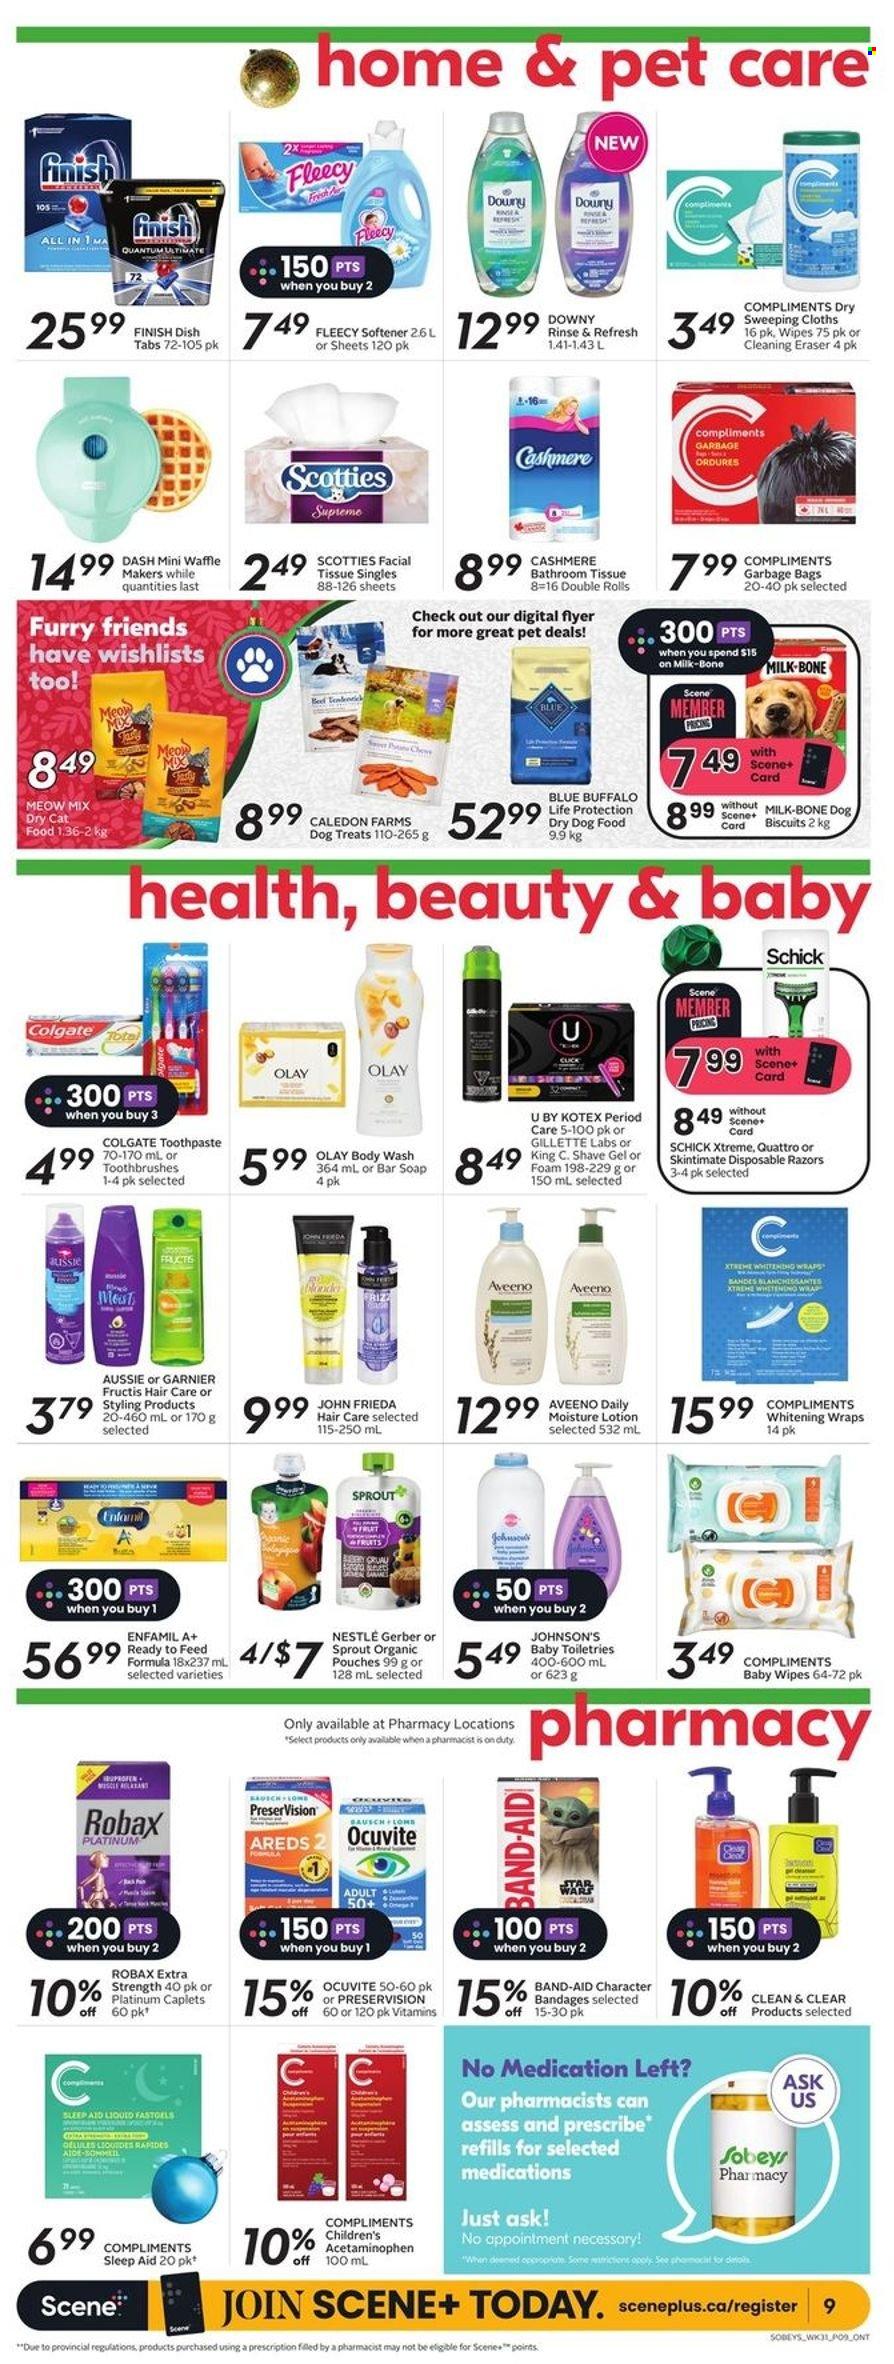 thumbnail - Sobeys Flyer - December 01, 2022 - December 07, 2022 - Sales products - wraps, milk, Gerber, Enfamil, wipes, baby wipes, Johnson's, Aveeno, bath tissue, fabric softener, body wash, soap bar, soap, toothpaste, Kotex, Gillette, Olay, Clean & Clear, Aussie, John Frieda, Fructis, body lotion, shave gel, Schick, disposable razor, animal food, dry dog food, animal treats, Blue Buffalo, cat food, dog food, dog biscuits, dry cat food, Meow Mix, band-aid, Colgate, Garnier, Nestlé, Ocuvite. Page 11.